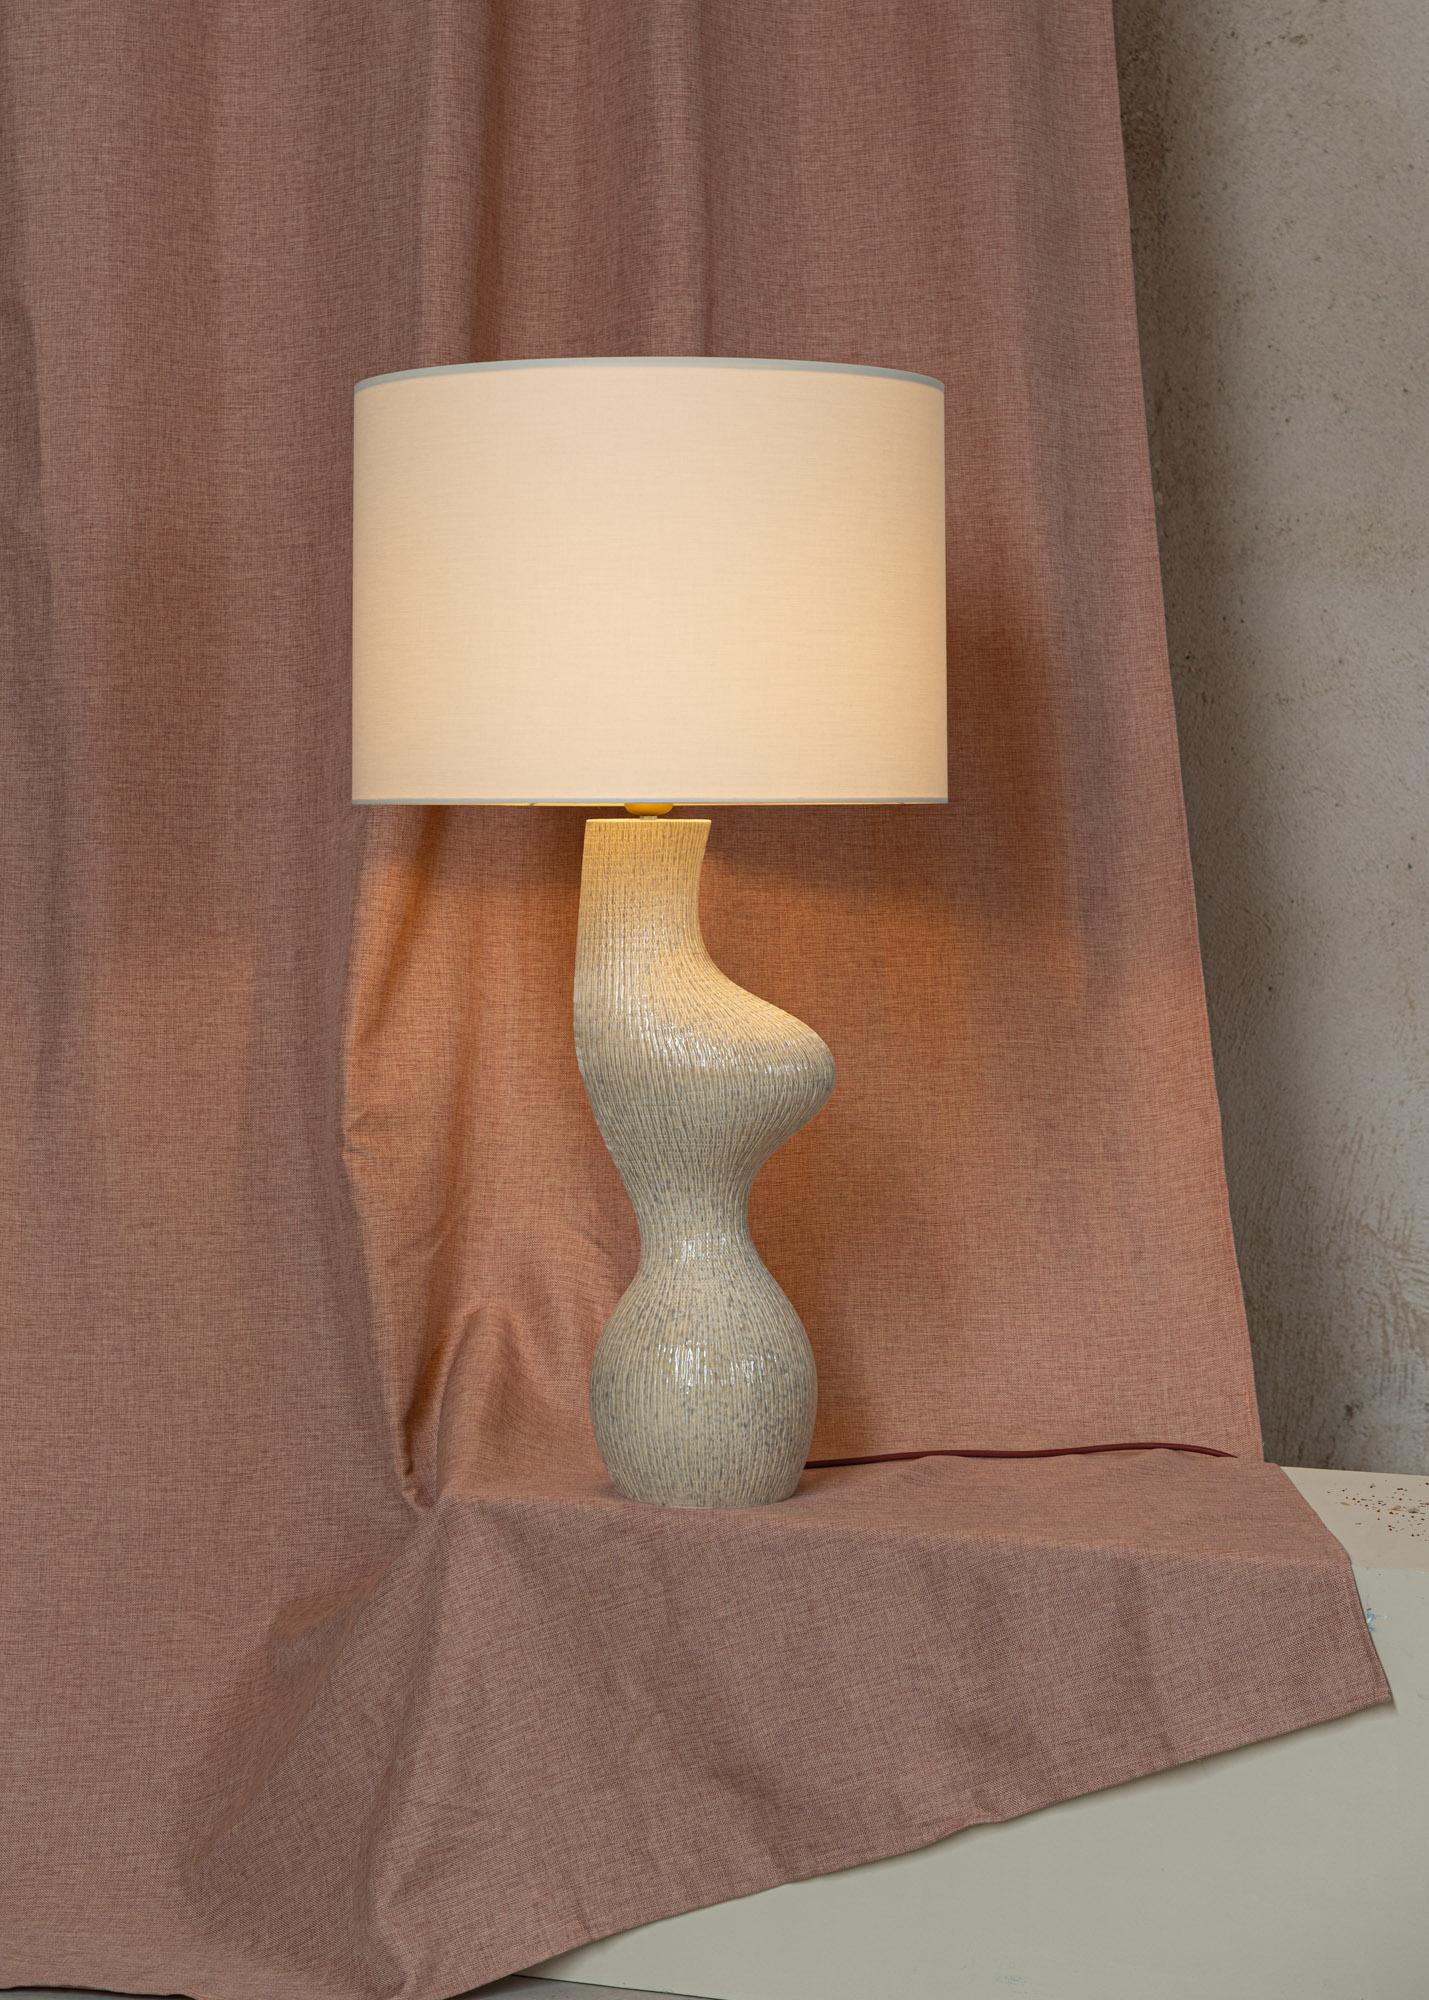 Beige Ribbed Ceramic Venuso Table Lamp by Simone & Marcel
Dimensions: Ø 50 x H 78 cm.
Materials: Cotton and ceramic.

Also available in different ceramic options. Custom options available on request. Please contact us. 

All our lamps can be wired